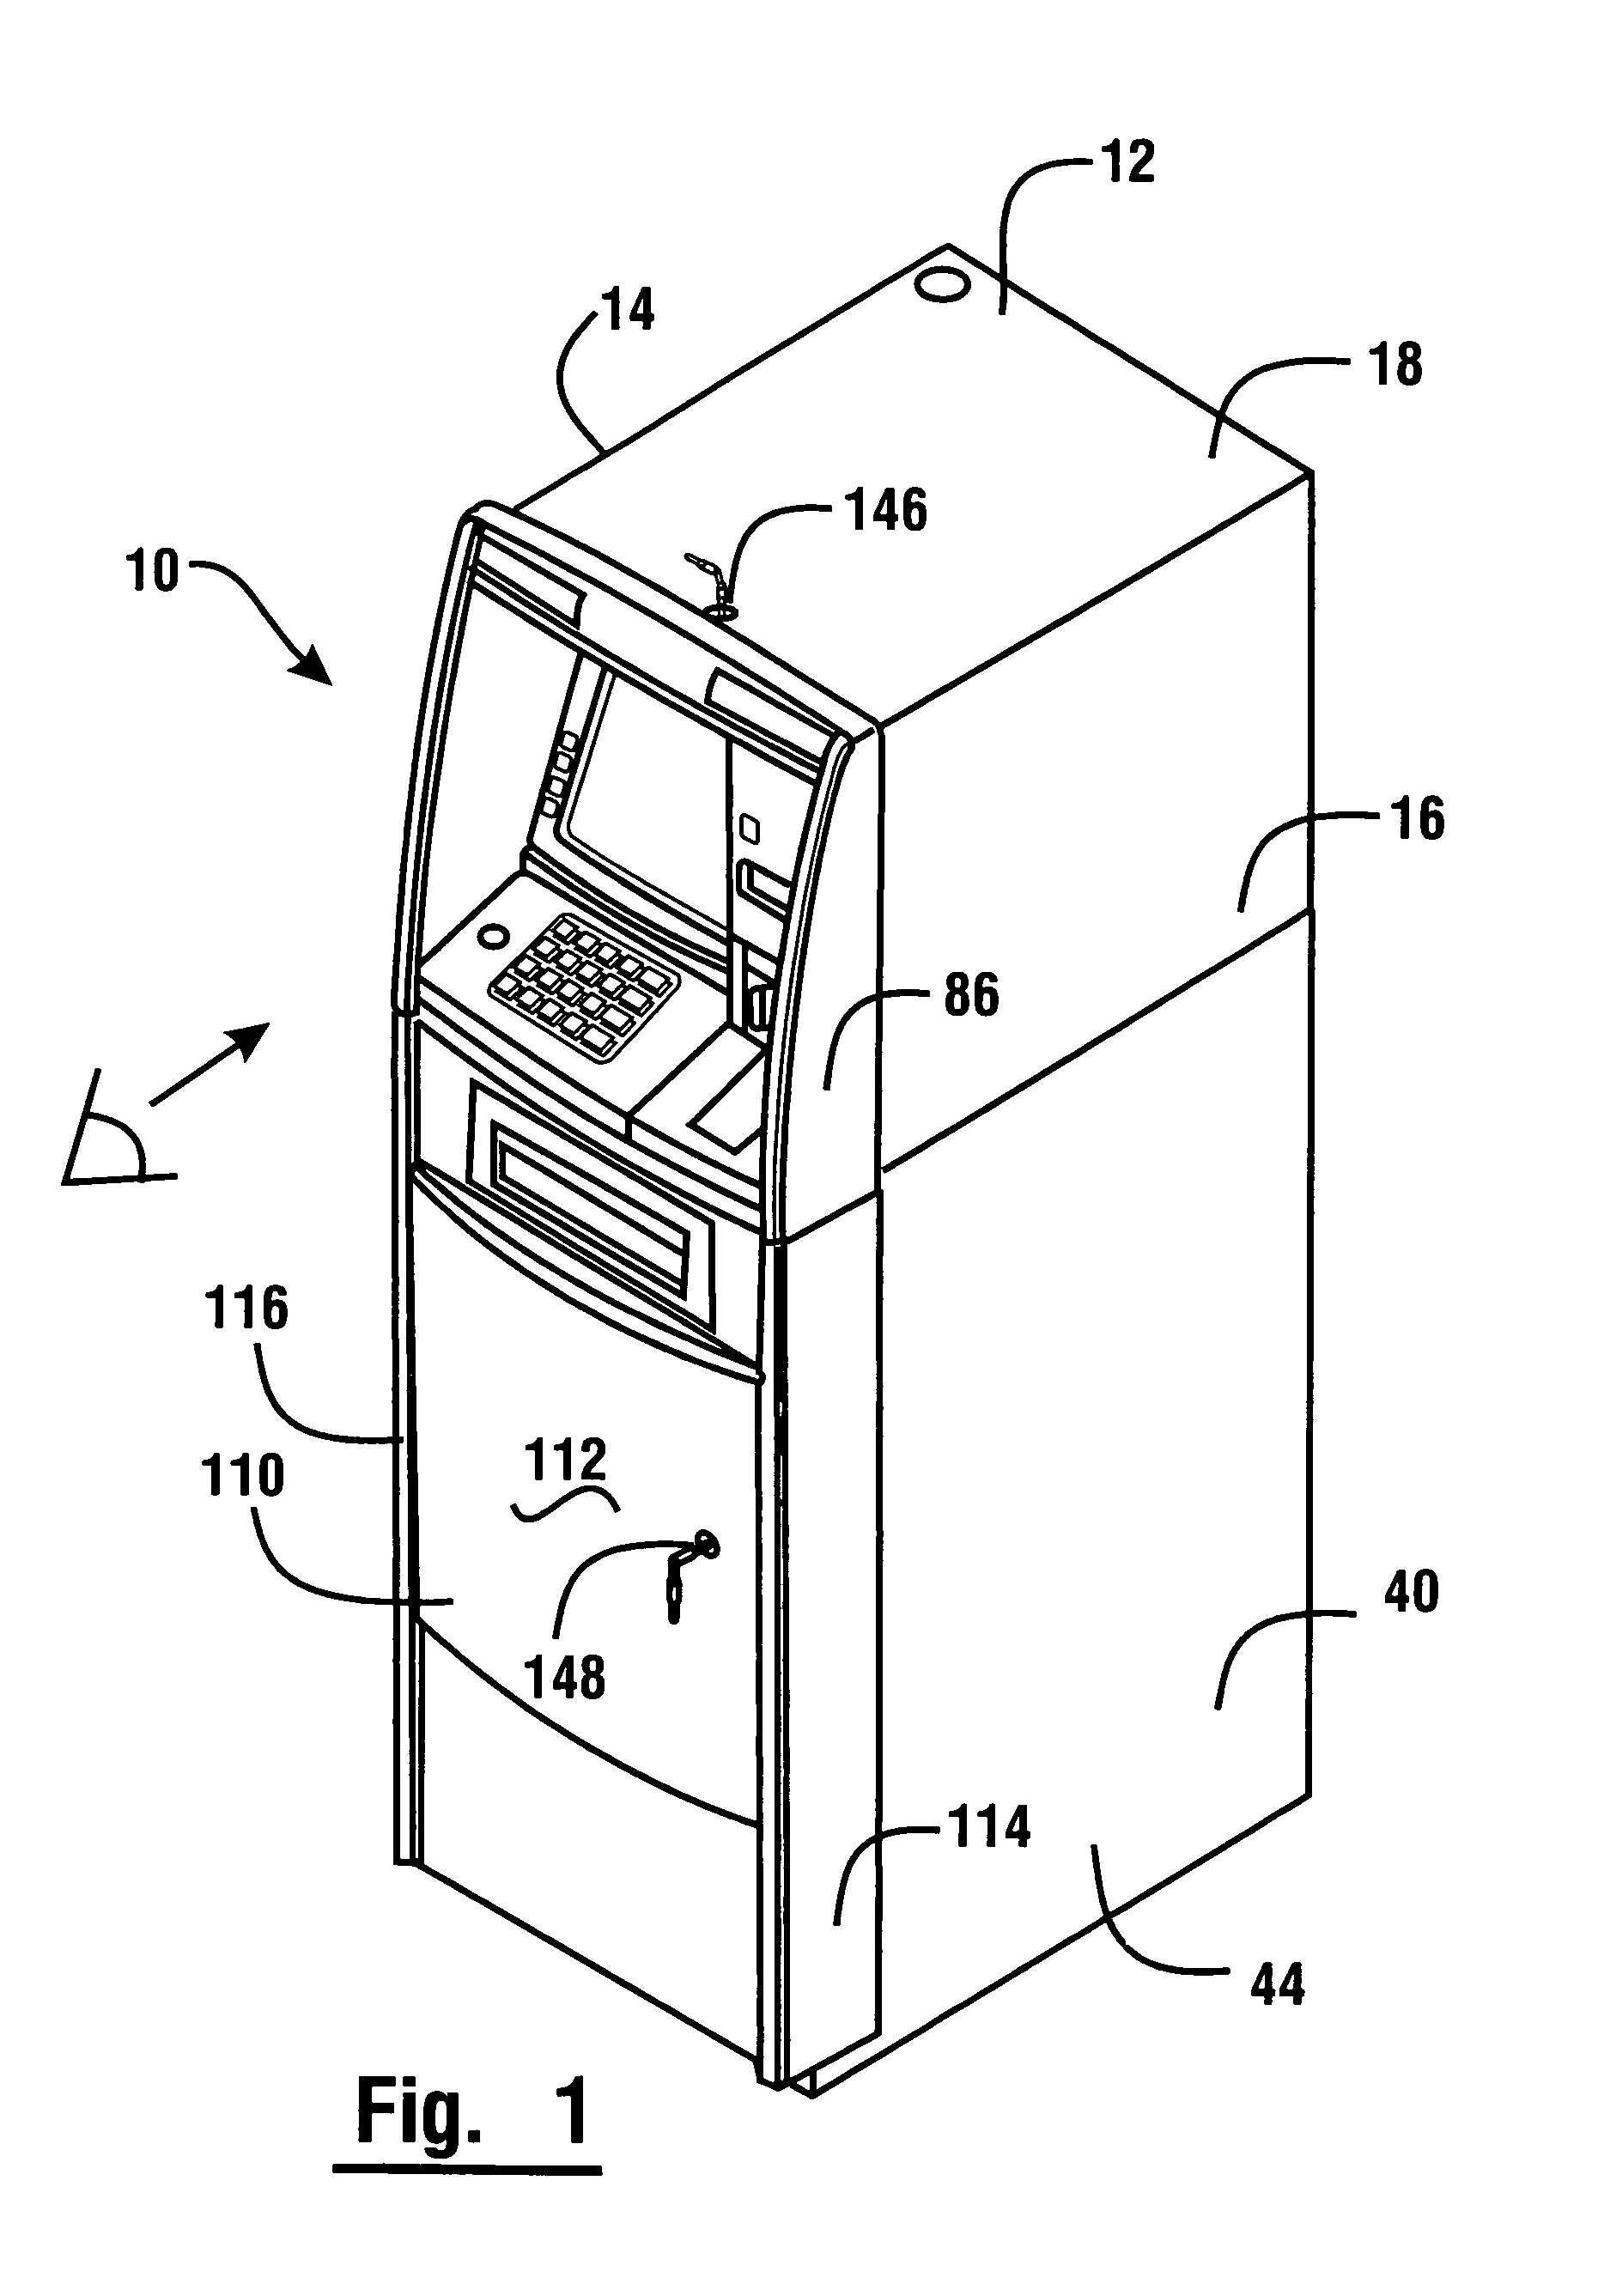 Enclosure for automated banking machine